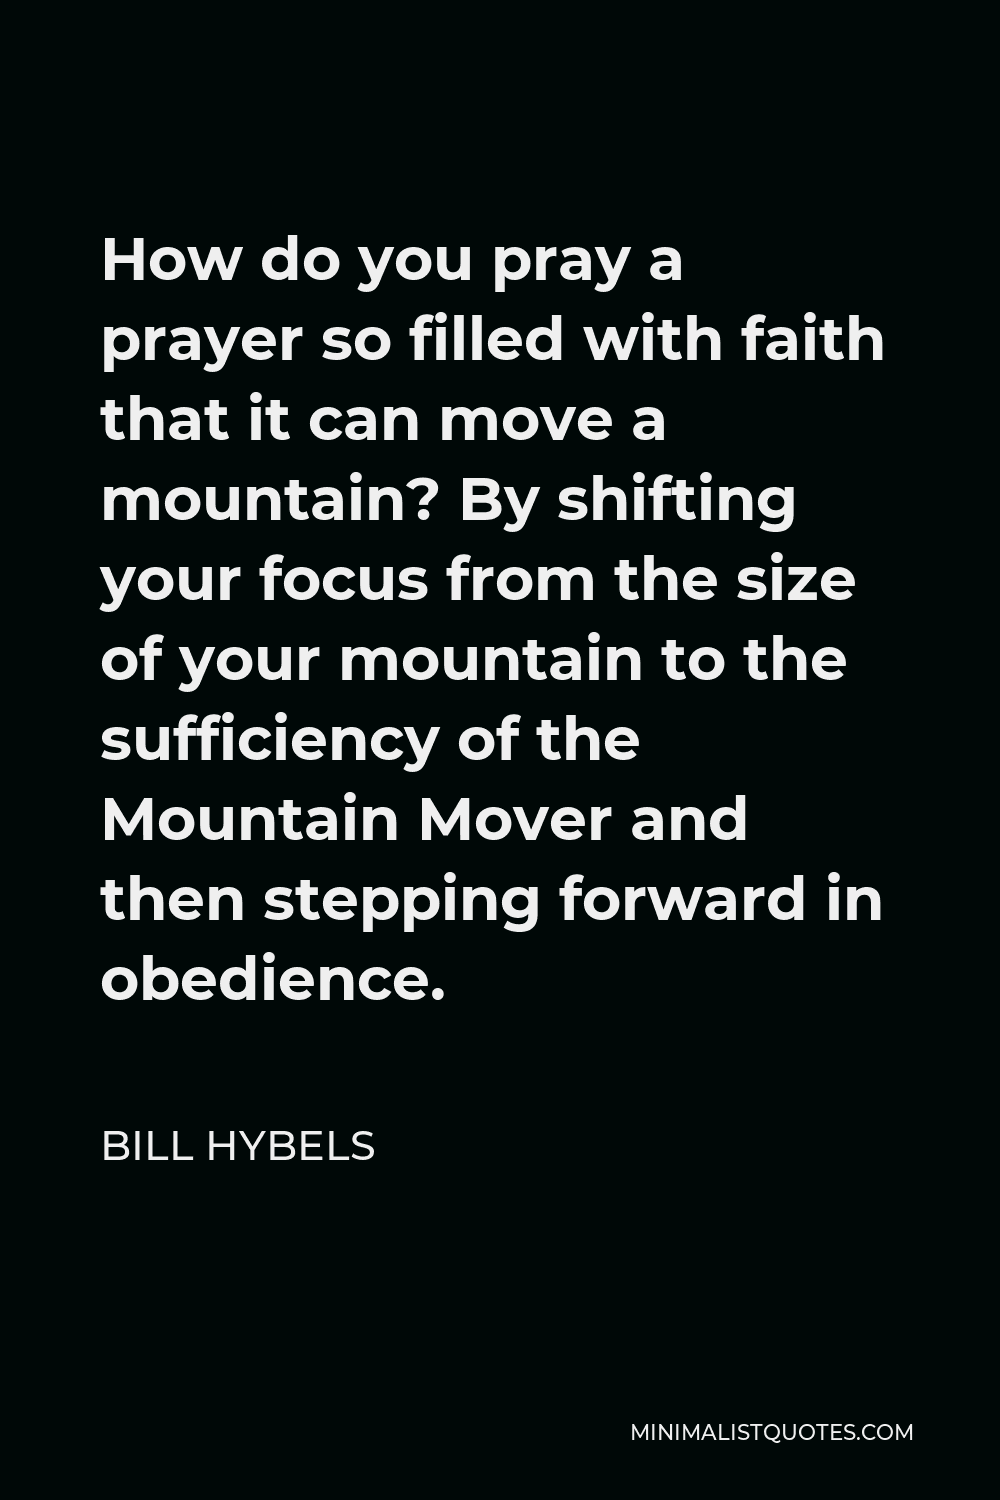 Bill Hybels Quote - How do you pray a prayer so filled with faith that it can move a mountain? By shifting your focus from the size of your mountain to the sufficiency of the Mountain Mover and then stepping forward in obedience.